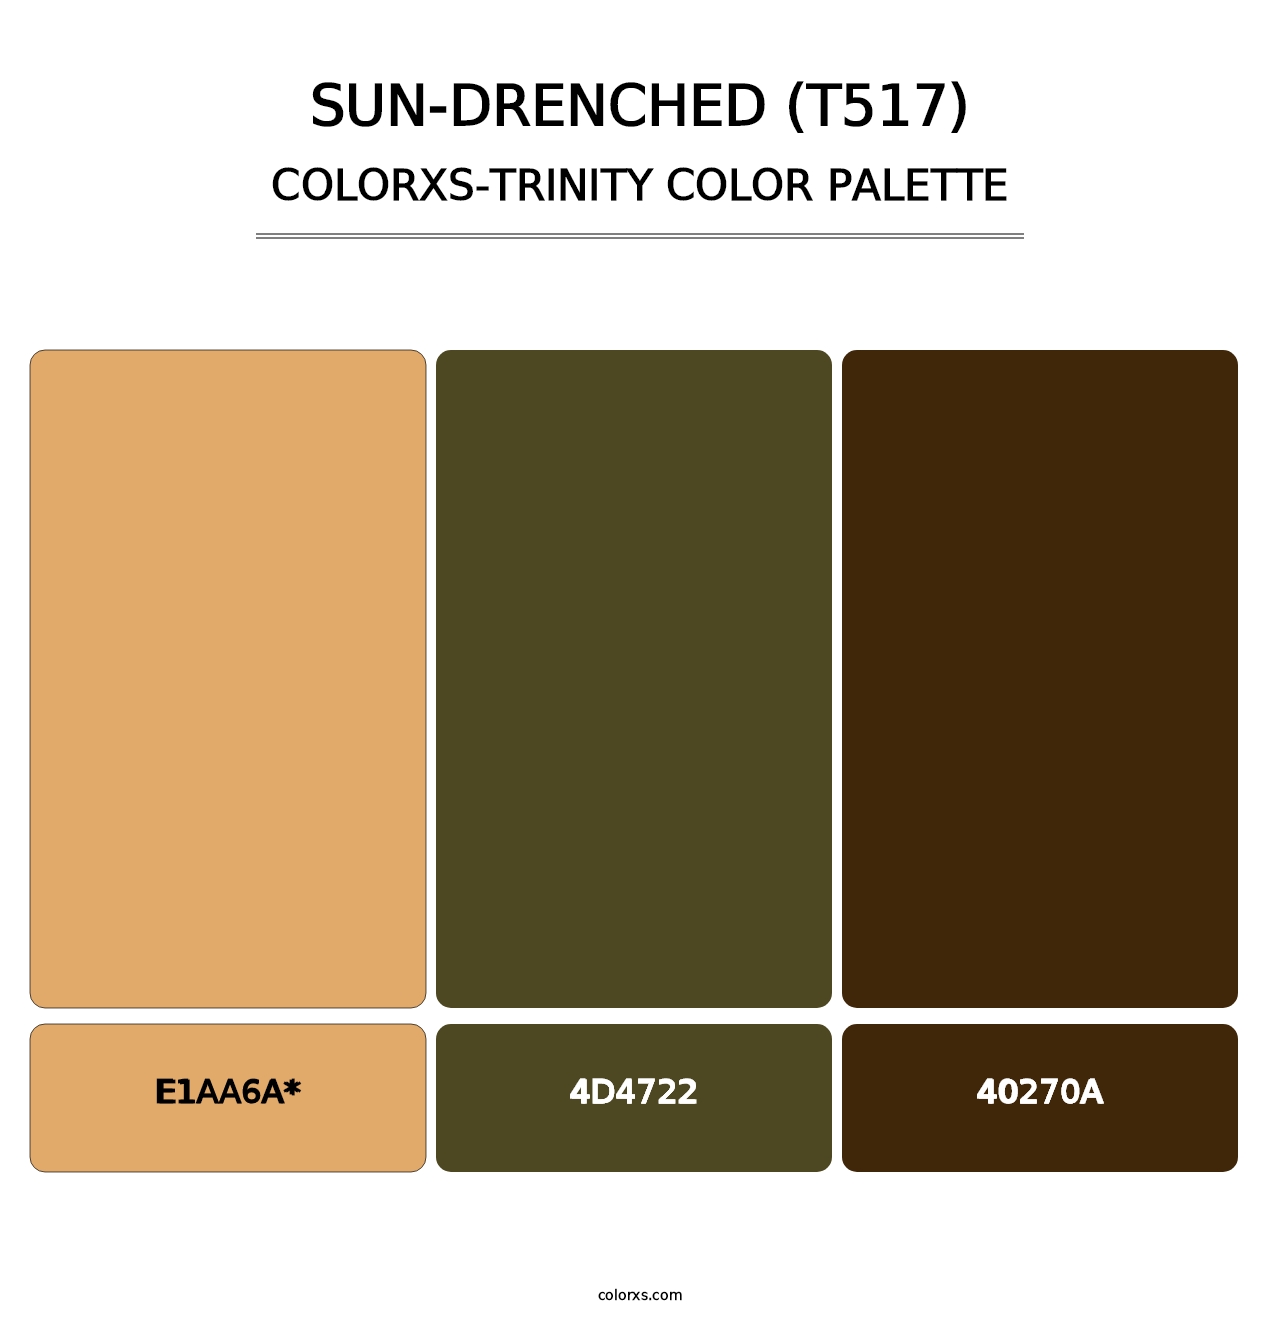 Sun-Drenched (T517) - Colorxs Trinity Palette